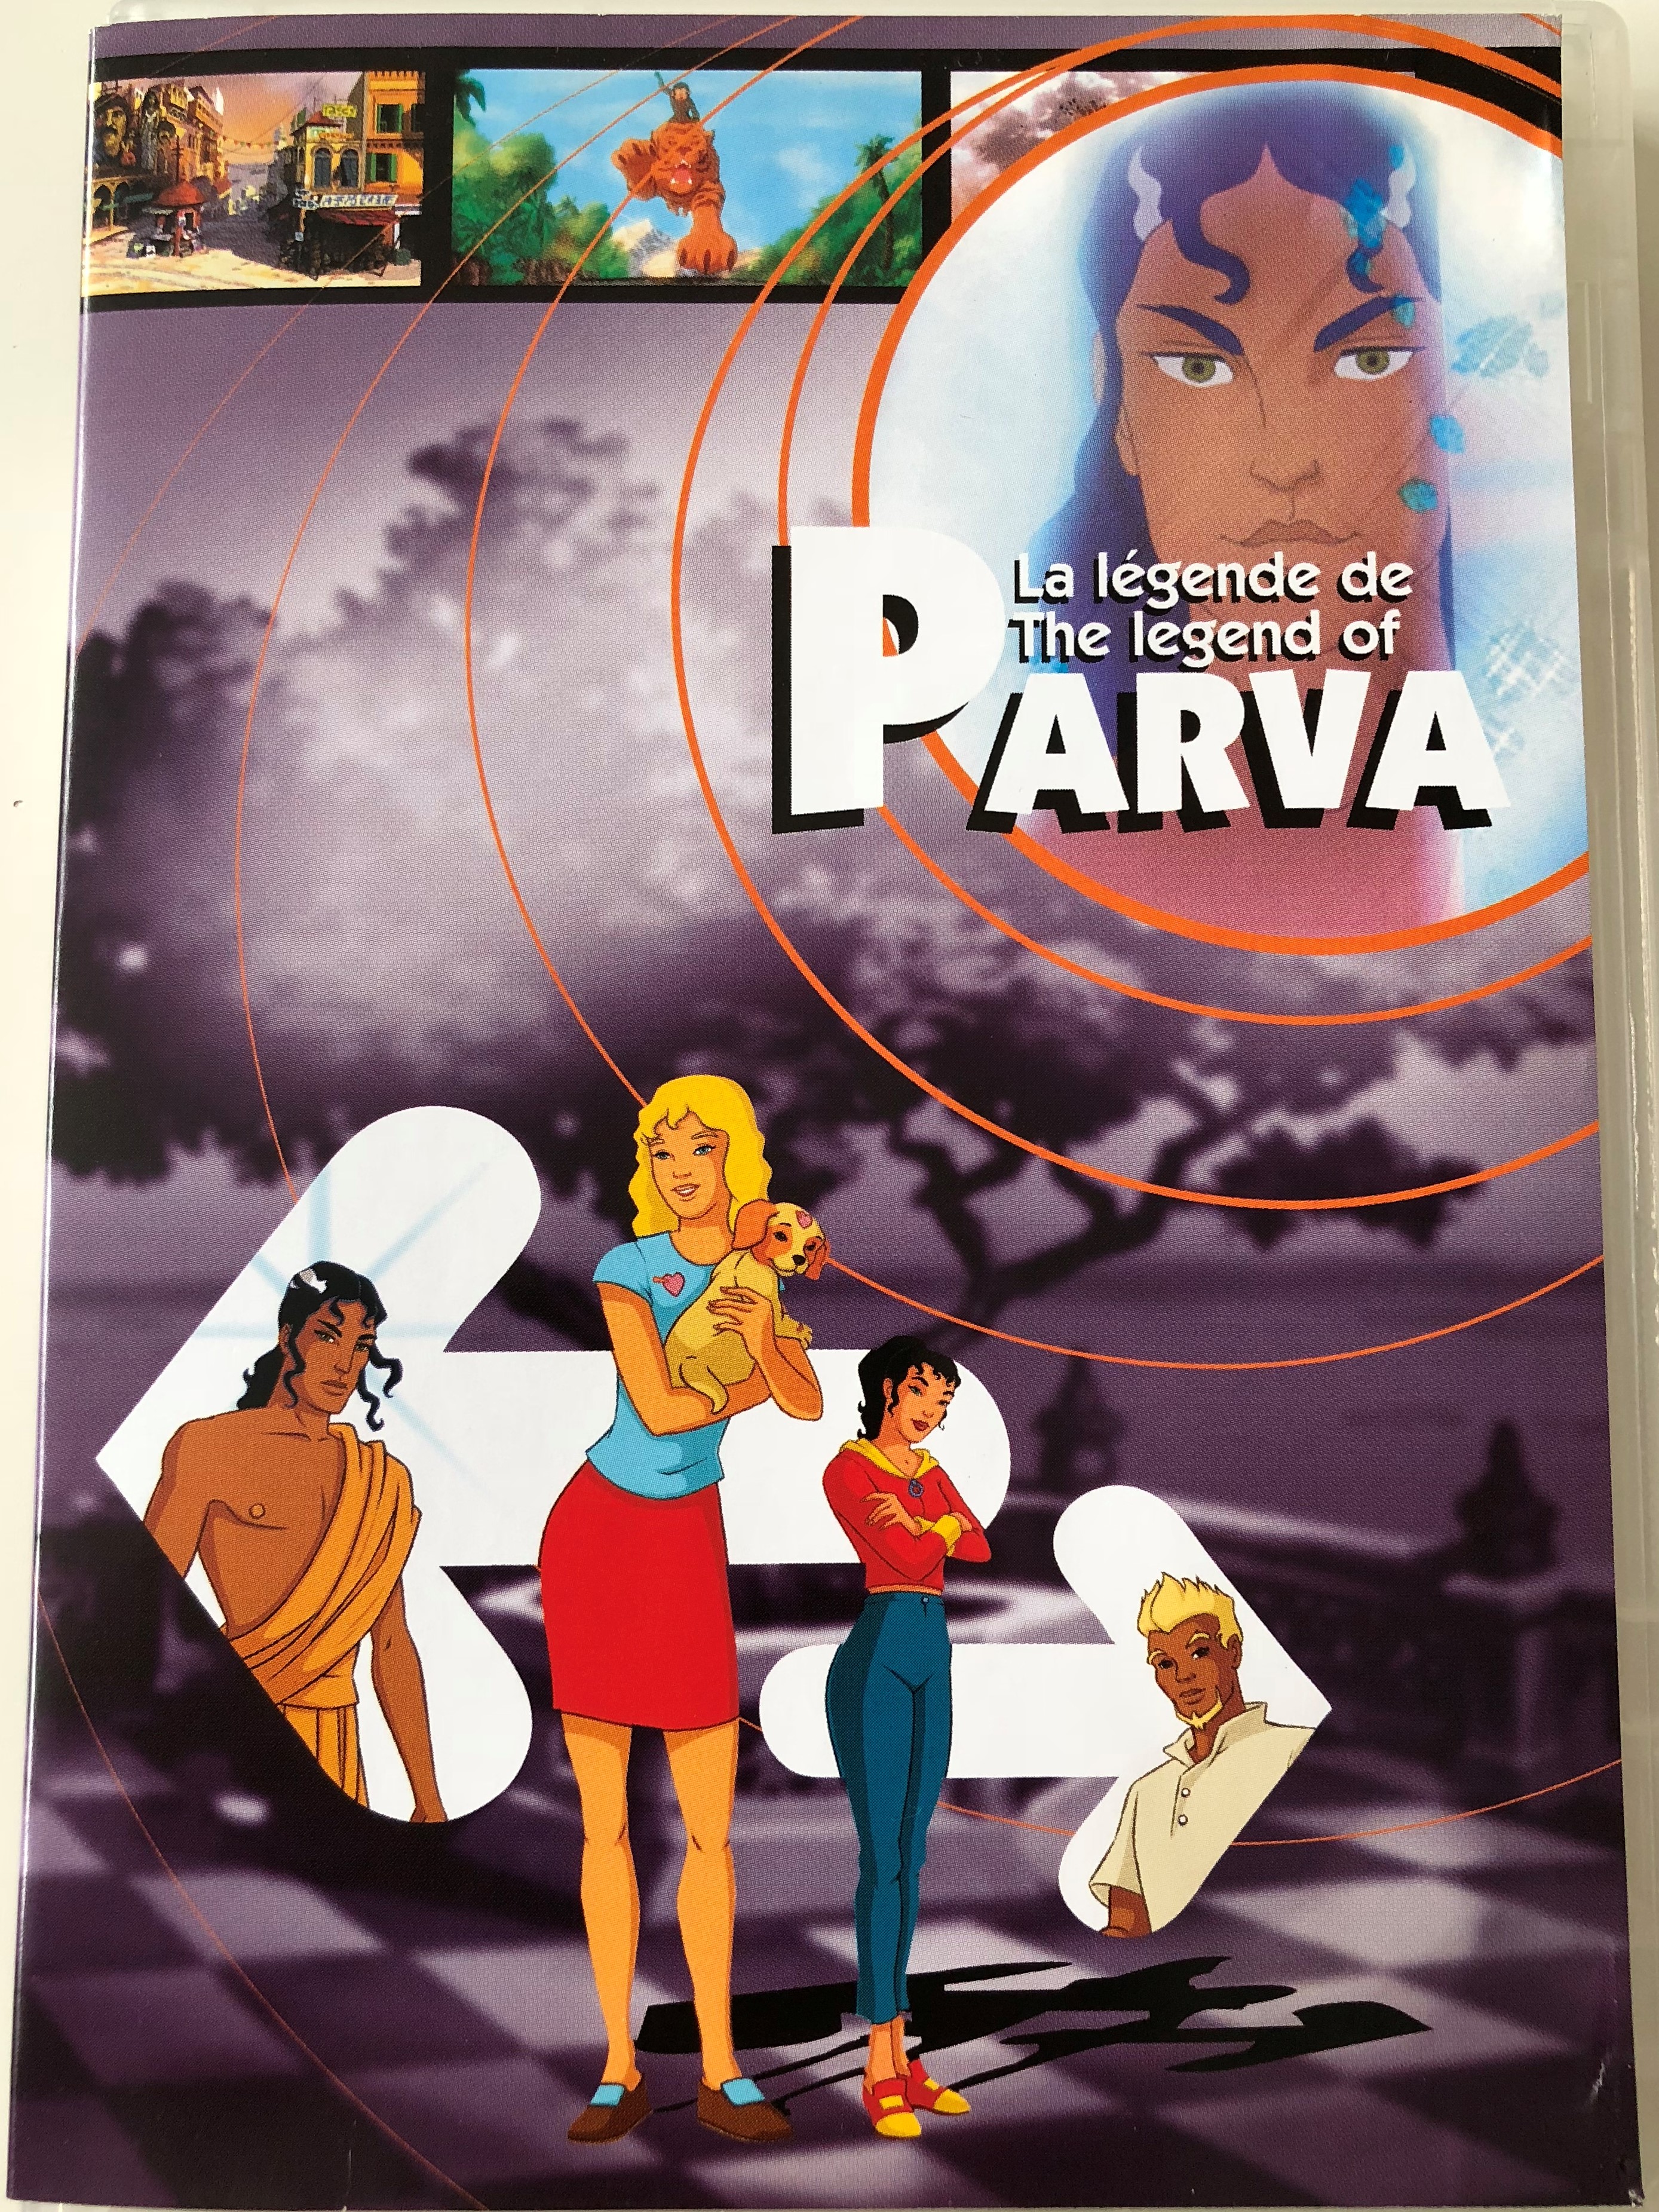 la-l-gende-de-parva-dvd-2003-the-legend-of-parva-directed-by-jean-cubaud-french-animated-movie-1-.jpg